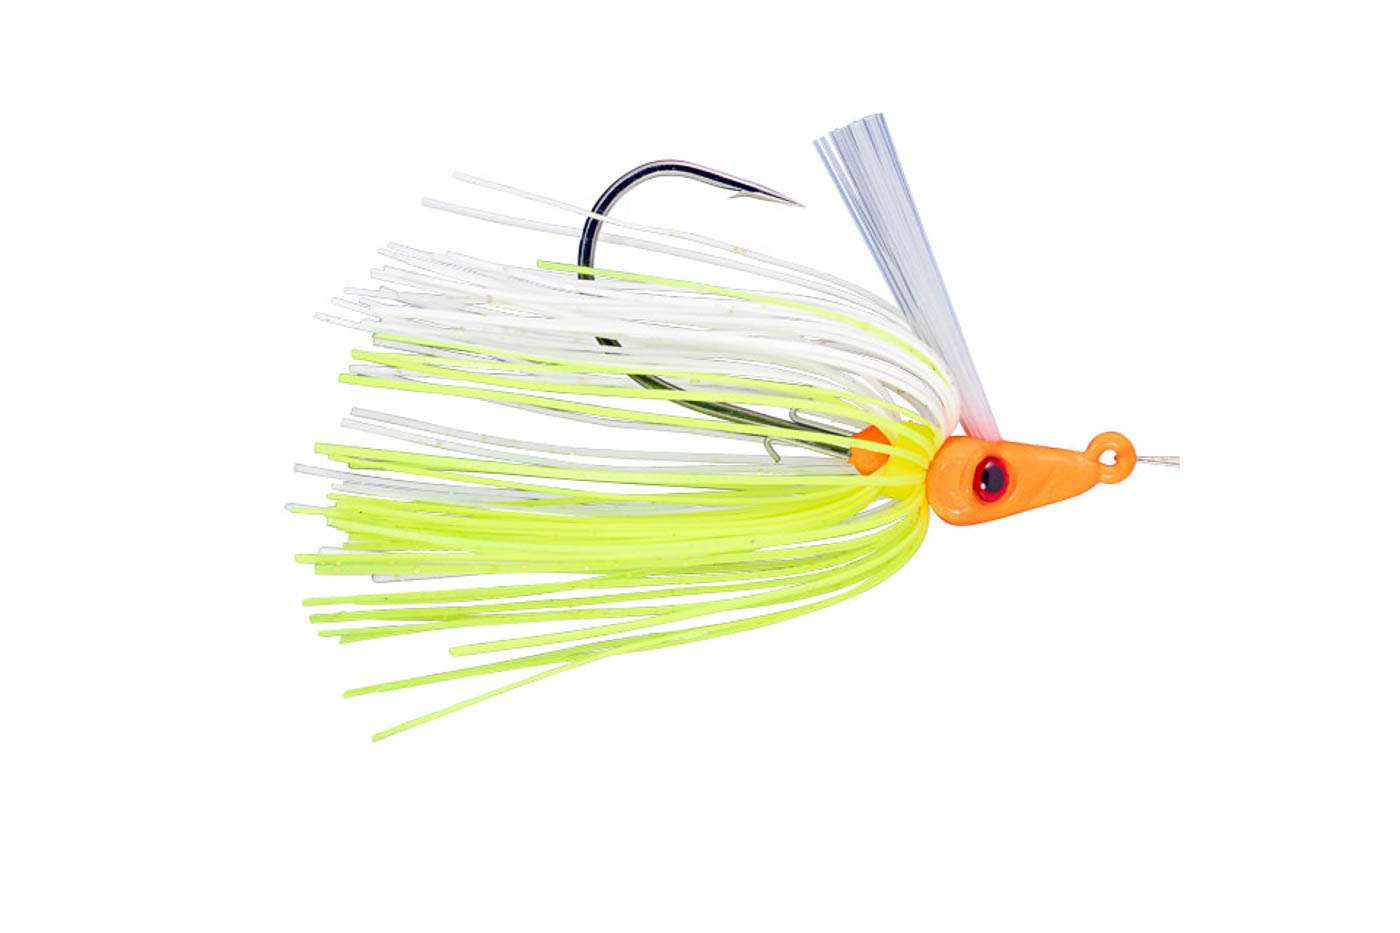 <p><strong>BOOYAH Mobster Swim Jig</strong></p><p>Hidden for years under a shroud of secrecy on the Arkansas River, the BOOYAH Mobster Swim Jig is finally making an introduction into the mainstream fishing world. The Mobster is built specifically with a mouse shaped head that comes through wood and grass better than any other jig on the market. Top-notch components back it up, like quality silicone skirts, a beefy hook, and a wire plastic keeper. The name comes in tell from the Muddy Water Mob fishing club that has modified this jig for years, for fishing on the incredibly pressured waters of the Arkansas River. <a href=